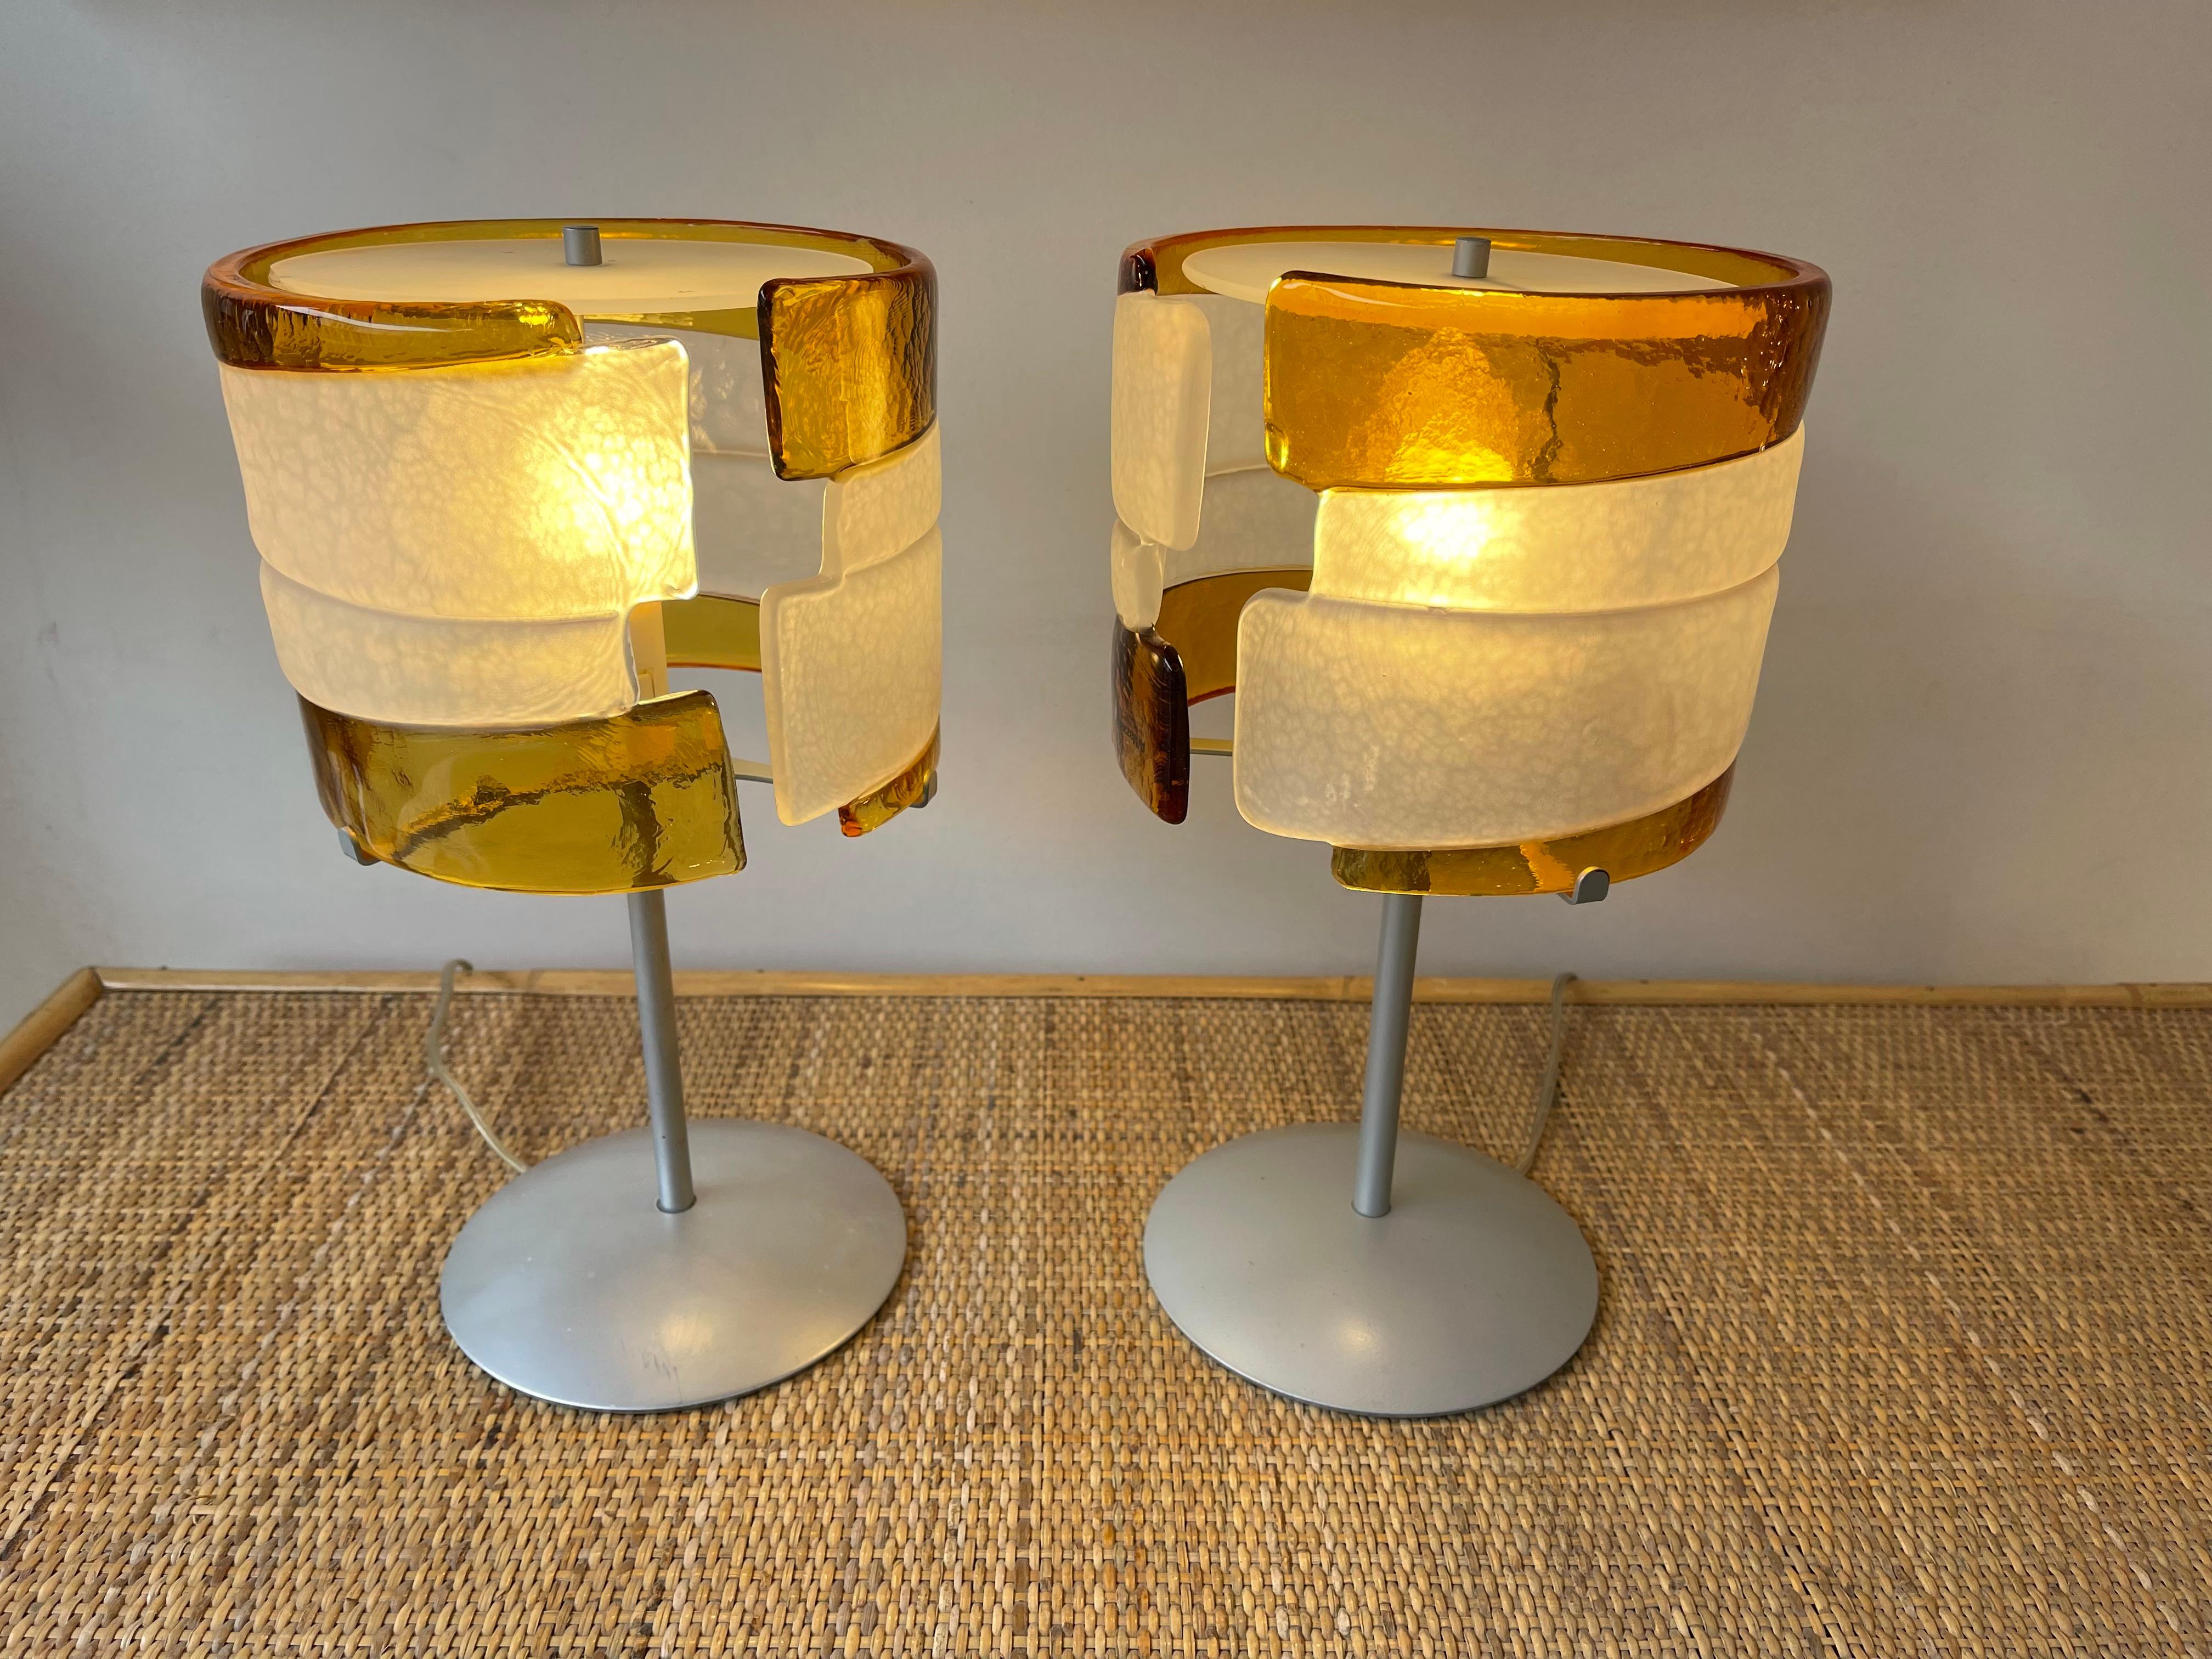 Pair of Murano Glass Lamps by Mazzega, Italy, 1980s For Sale 5